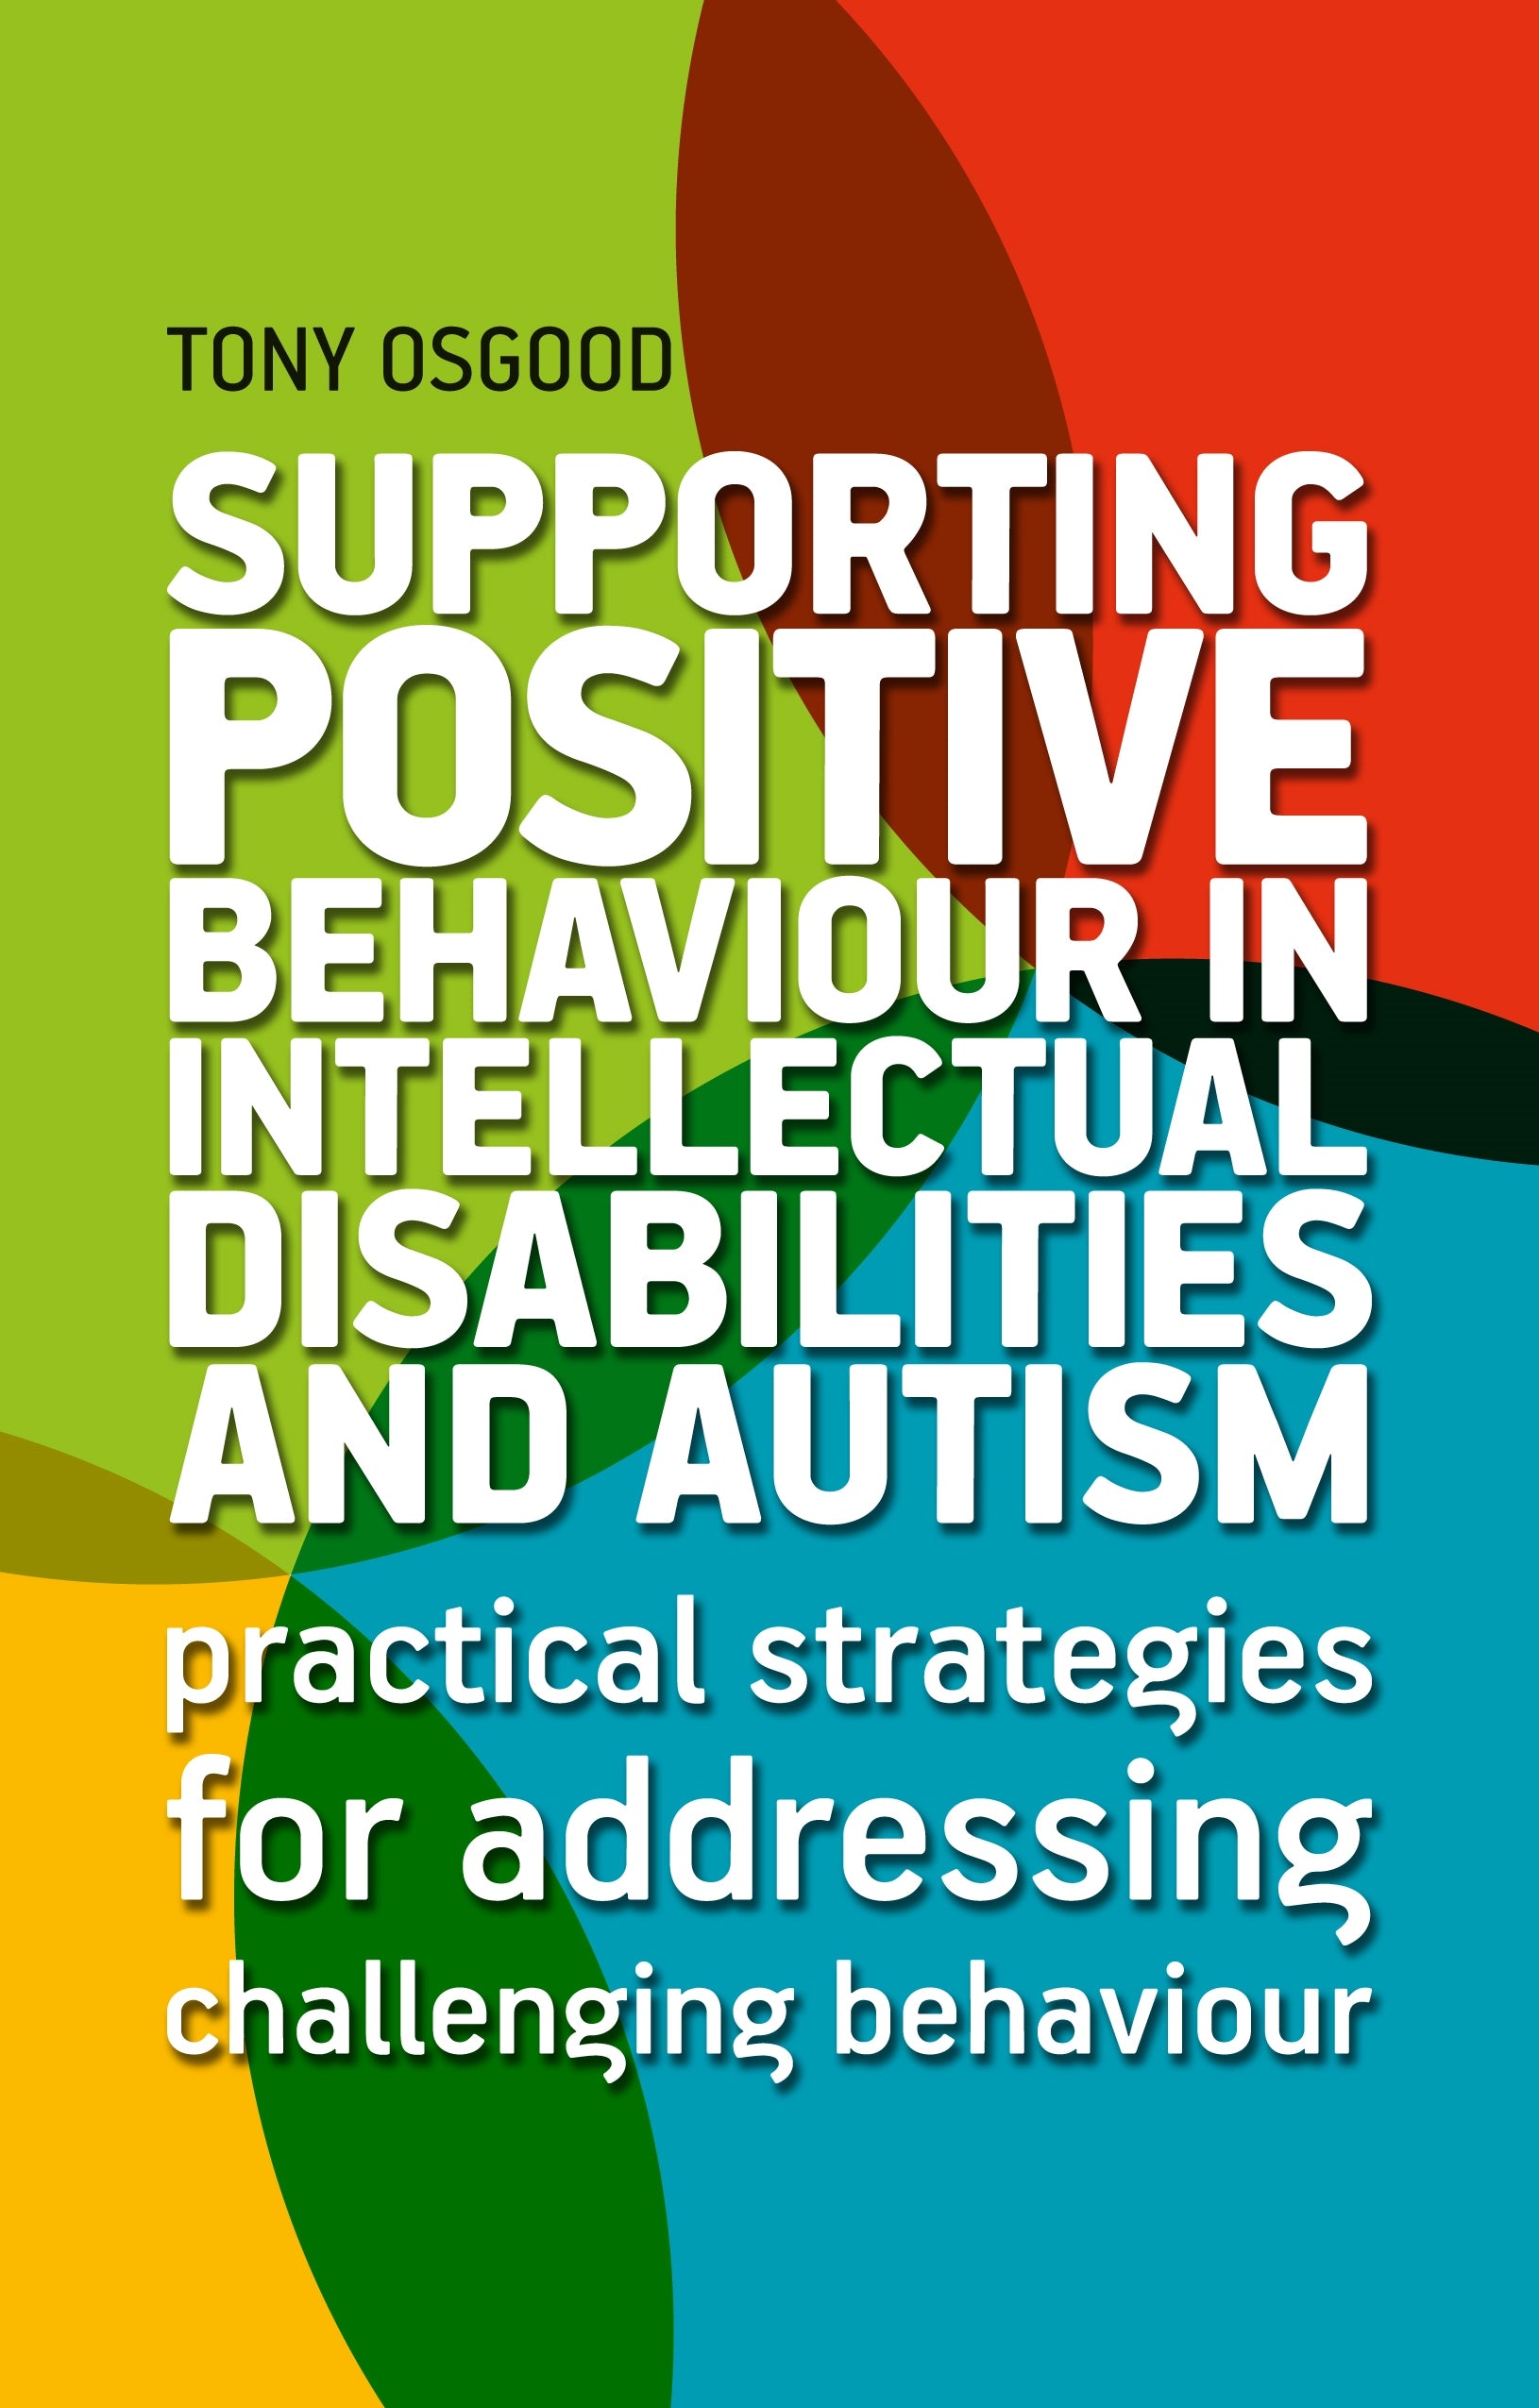 Supporting Positive Behaviour in Intellectual Disabilities and Autism by Tony Osgood